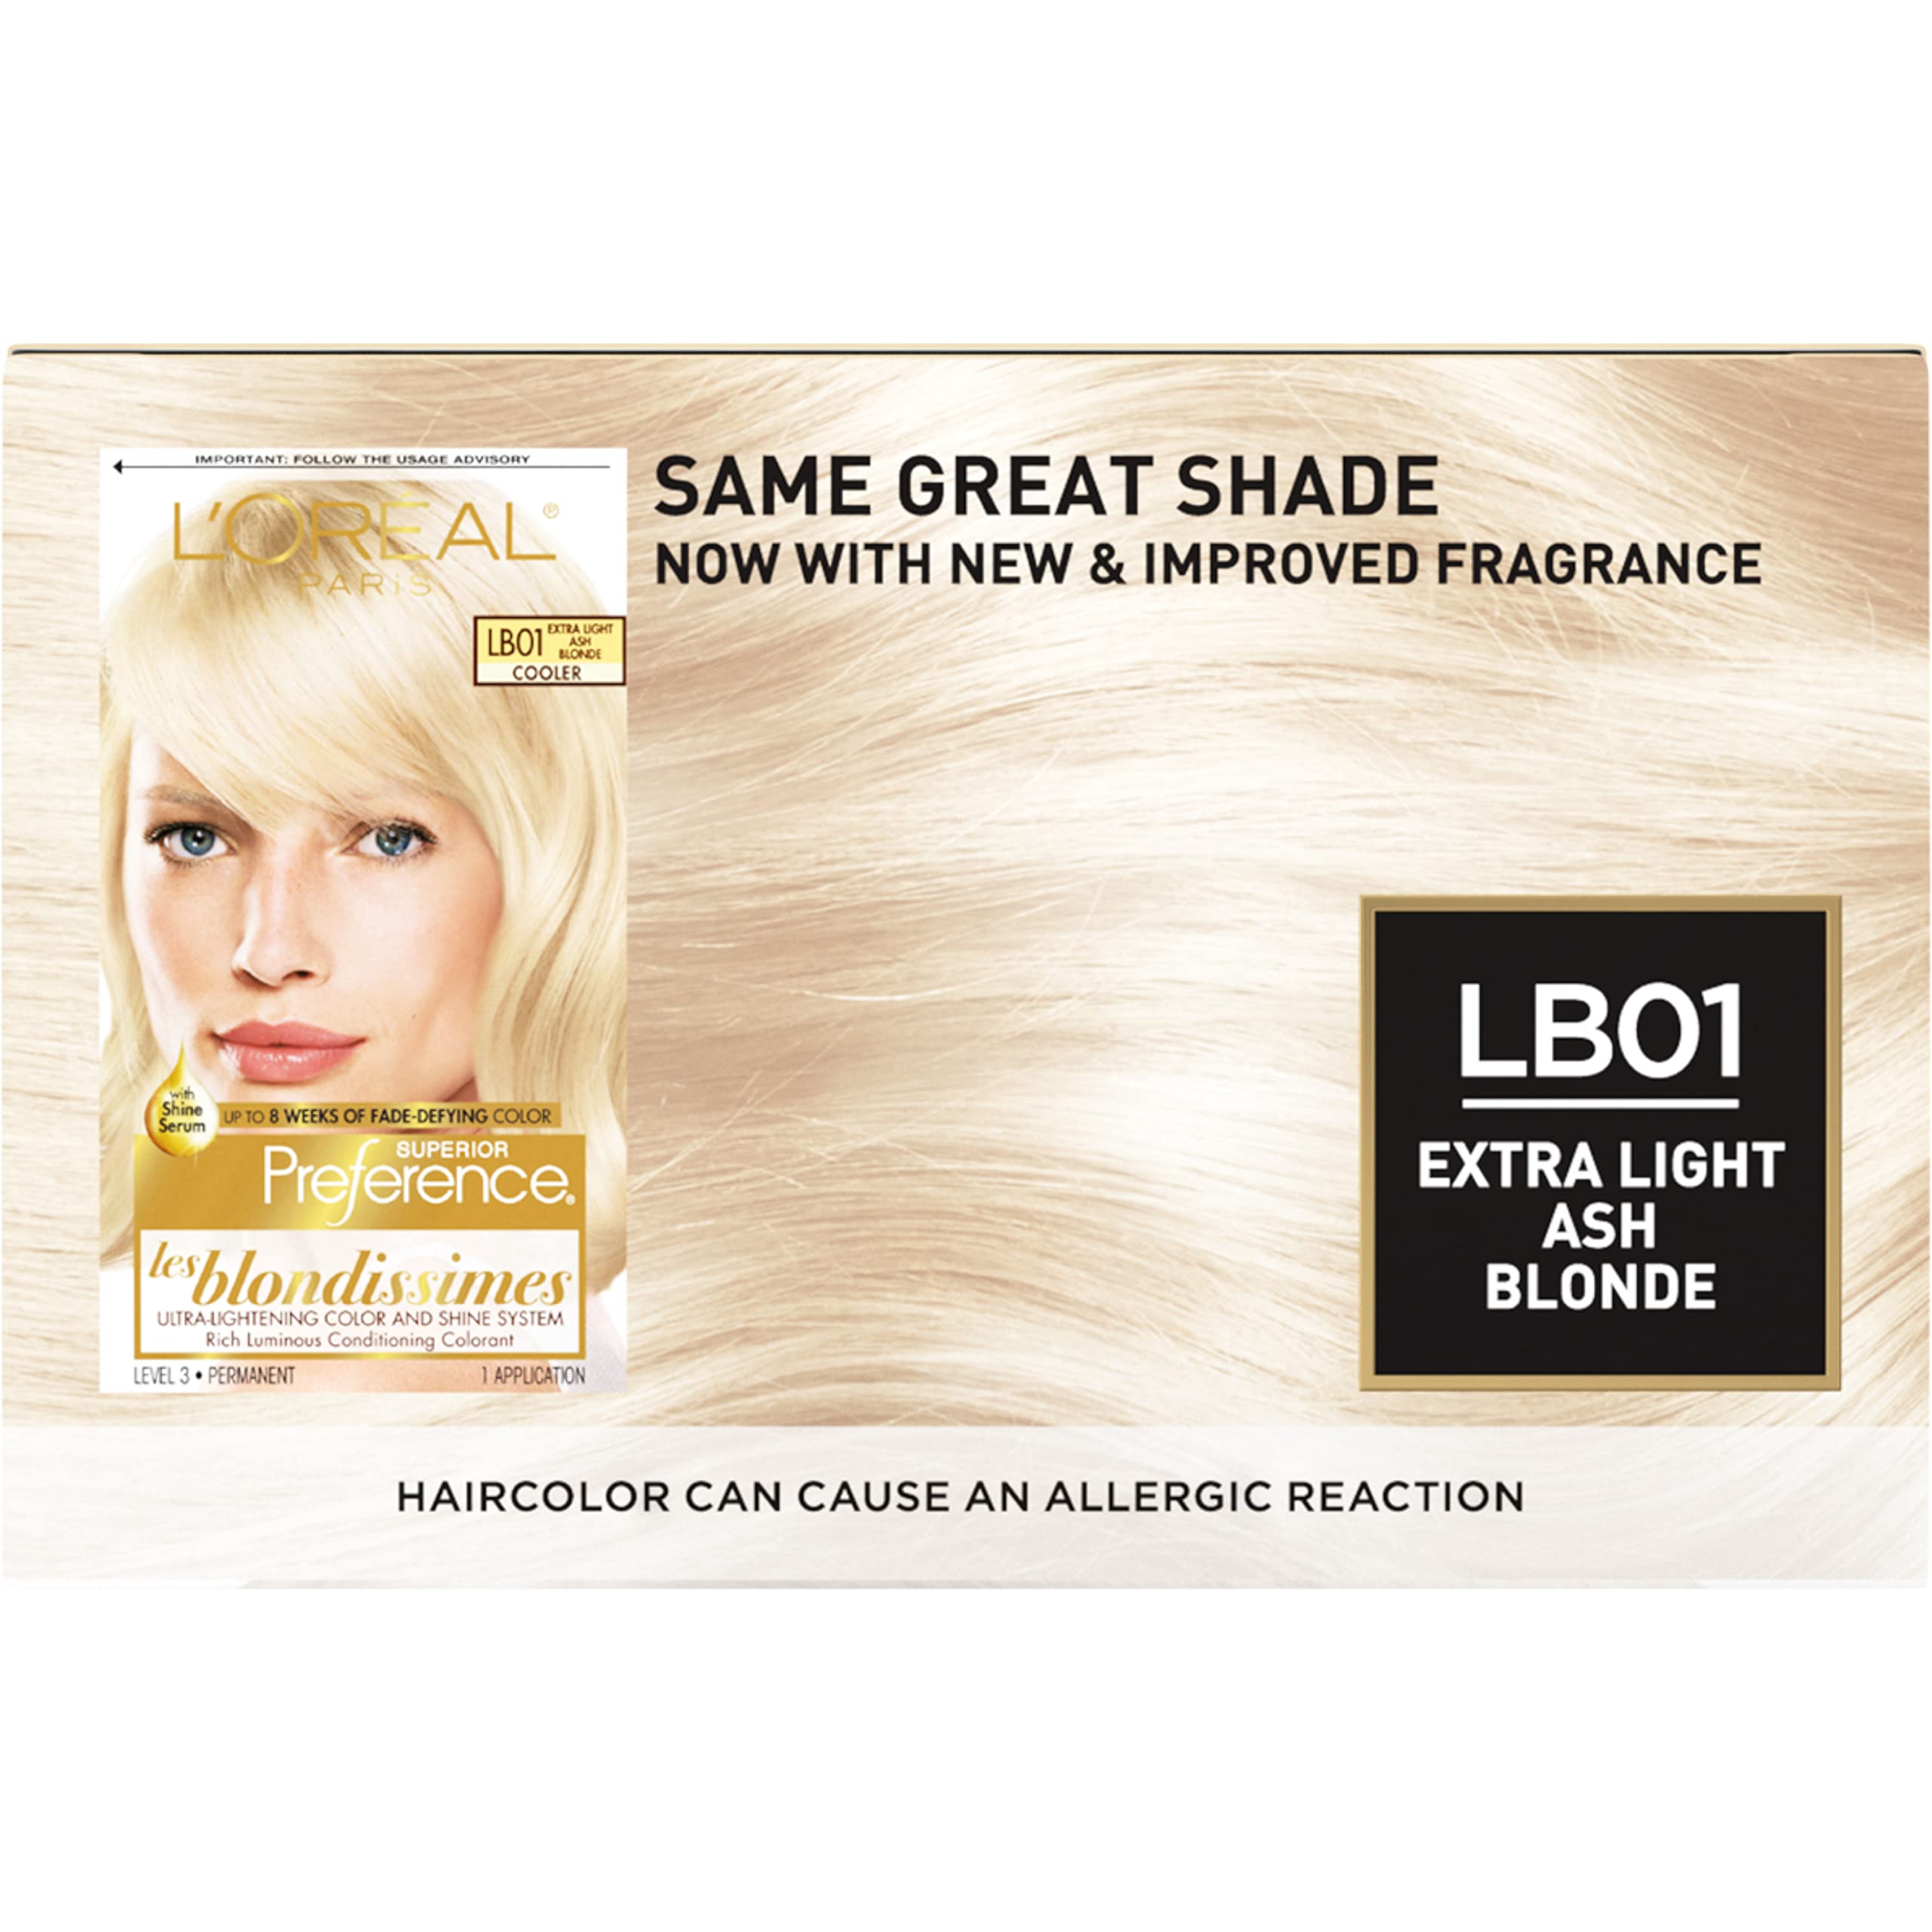 L'Oreal Paris Superior Preference Fade-Defying + Shine Permanent Hair Color, LB01 Extra Light Ash Blonde, Pack of 1, Hair Dye